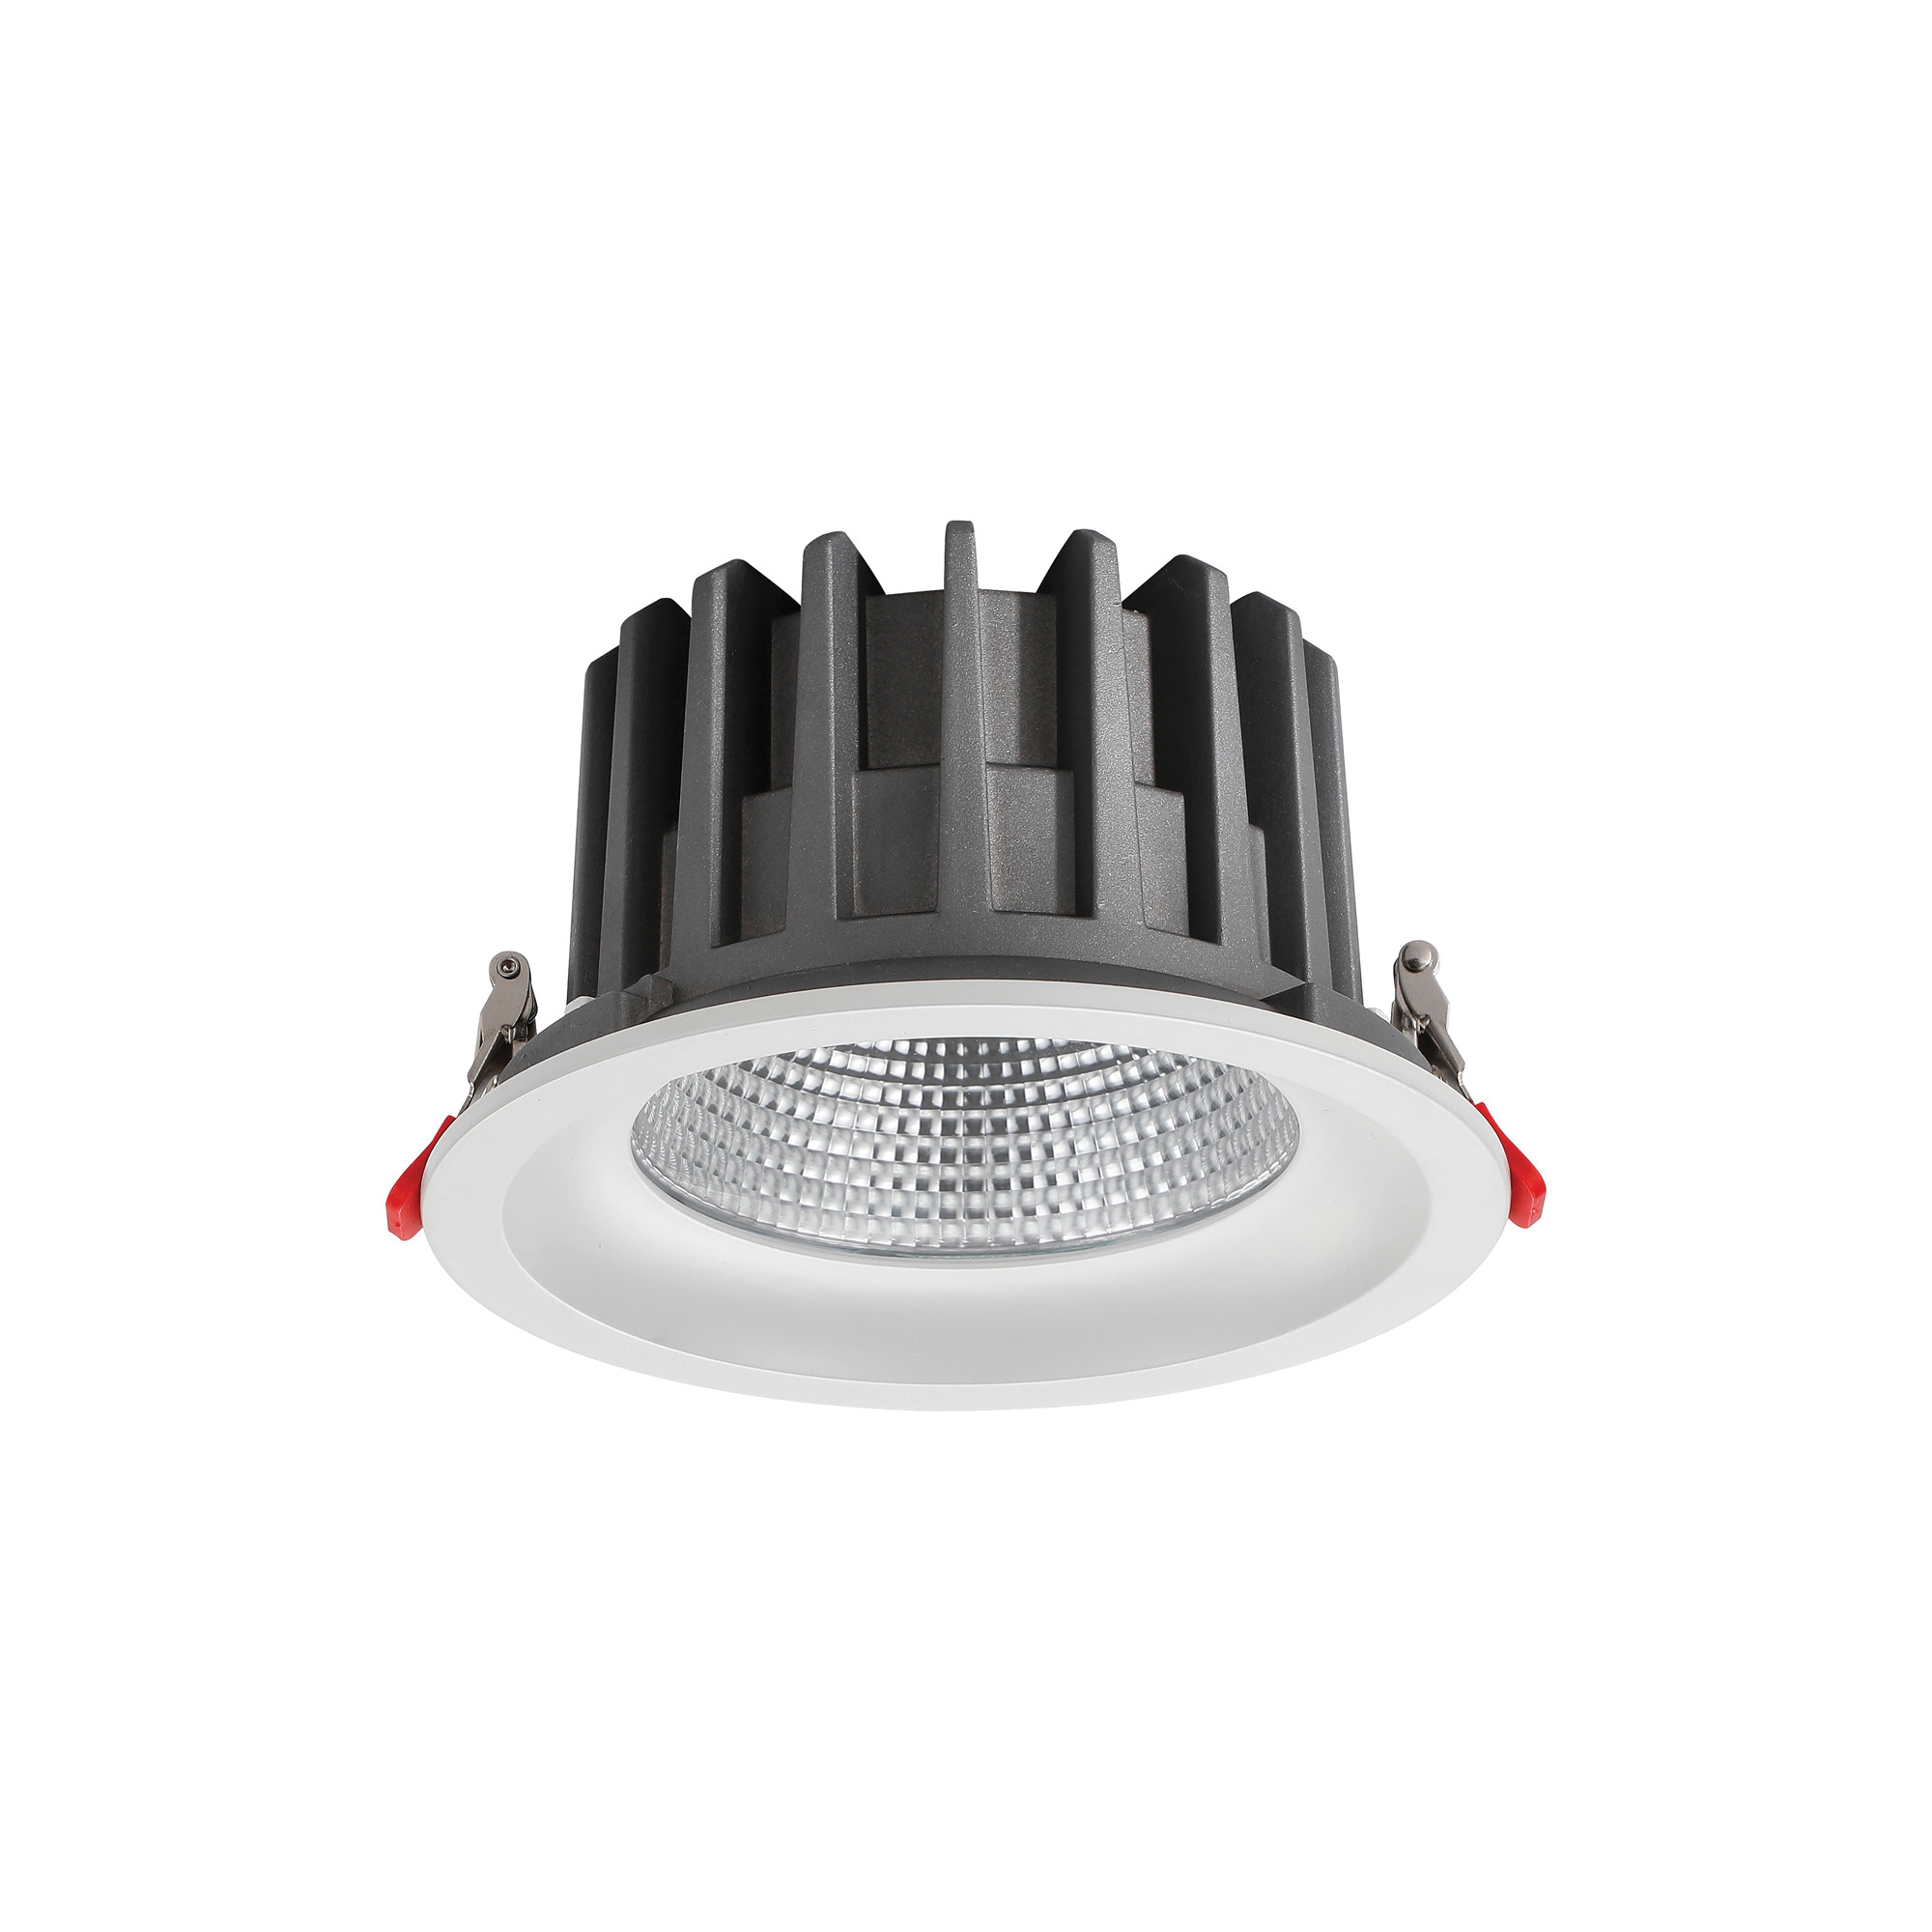 DL200064  Bionic 40; 40W; 1000mA; White Deep Round Recessed Downlight; 3463lm ;Cut Out 175mm; 40° ; 3000K; IP44; DRIVER INC.; 5yrs Warranty.